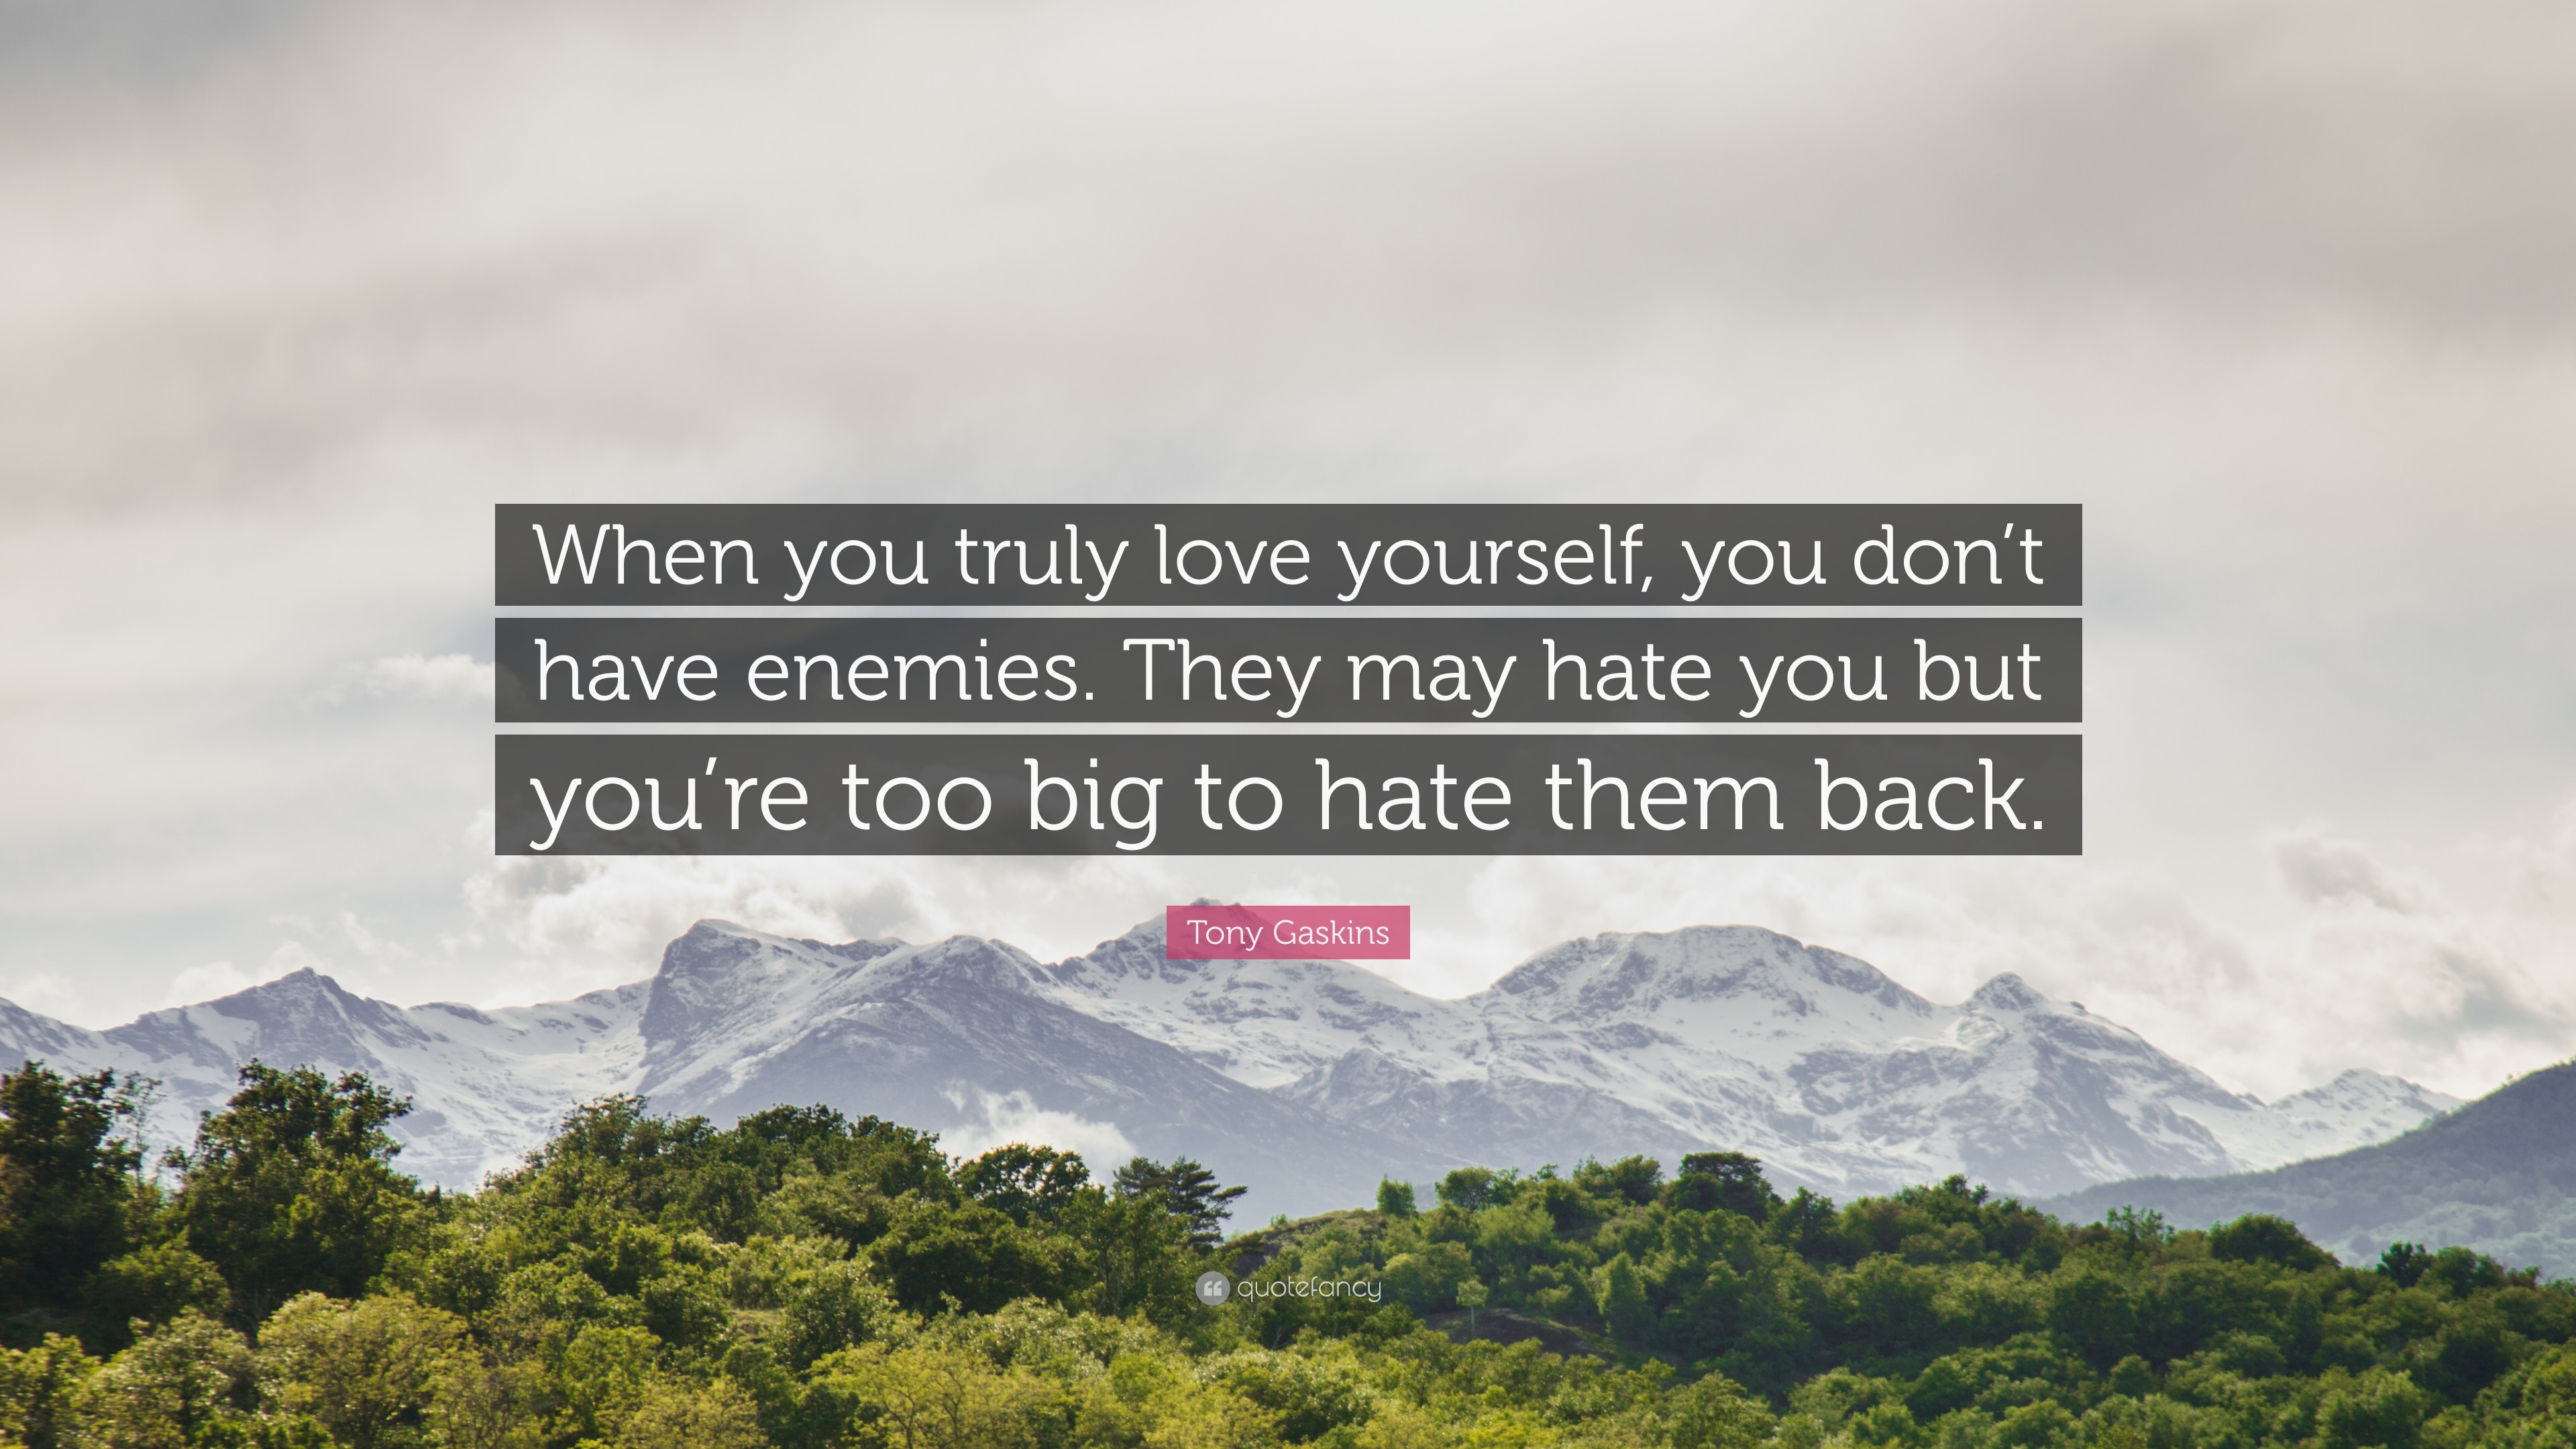 Tony Gaskins Quote “When you truly love yourself you don t have